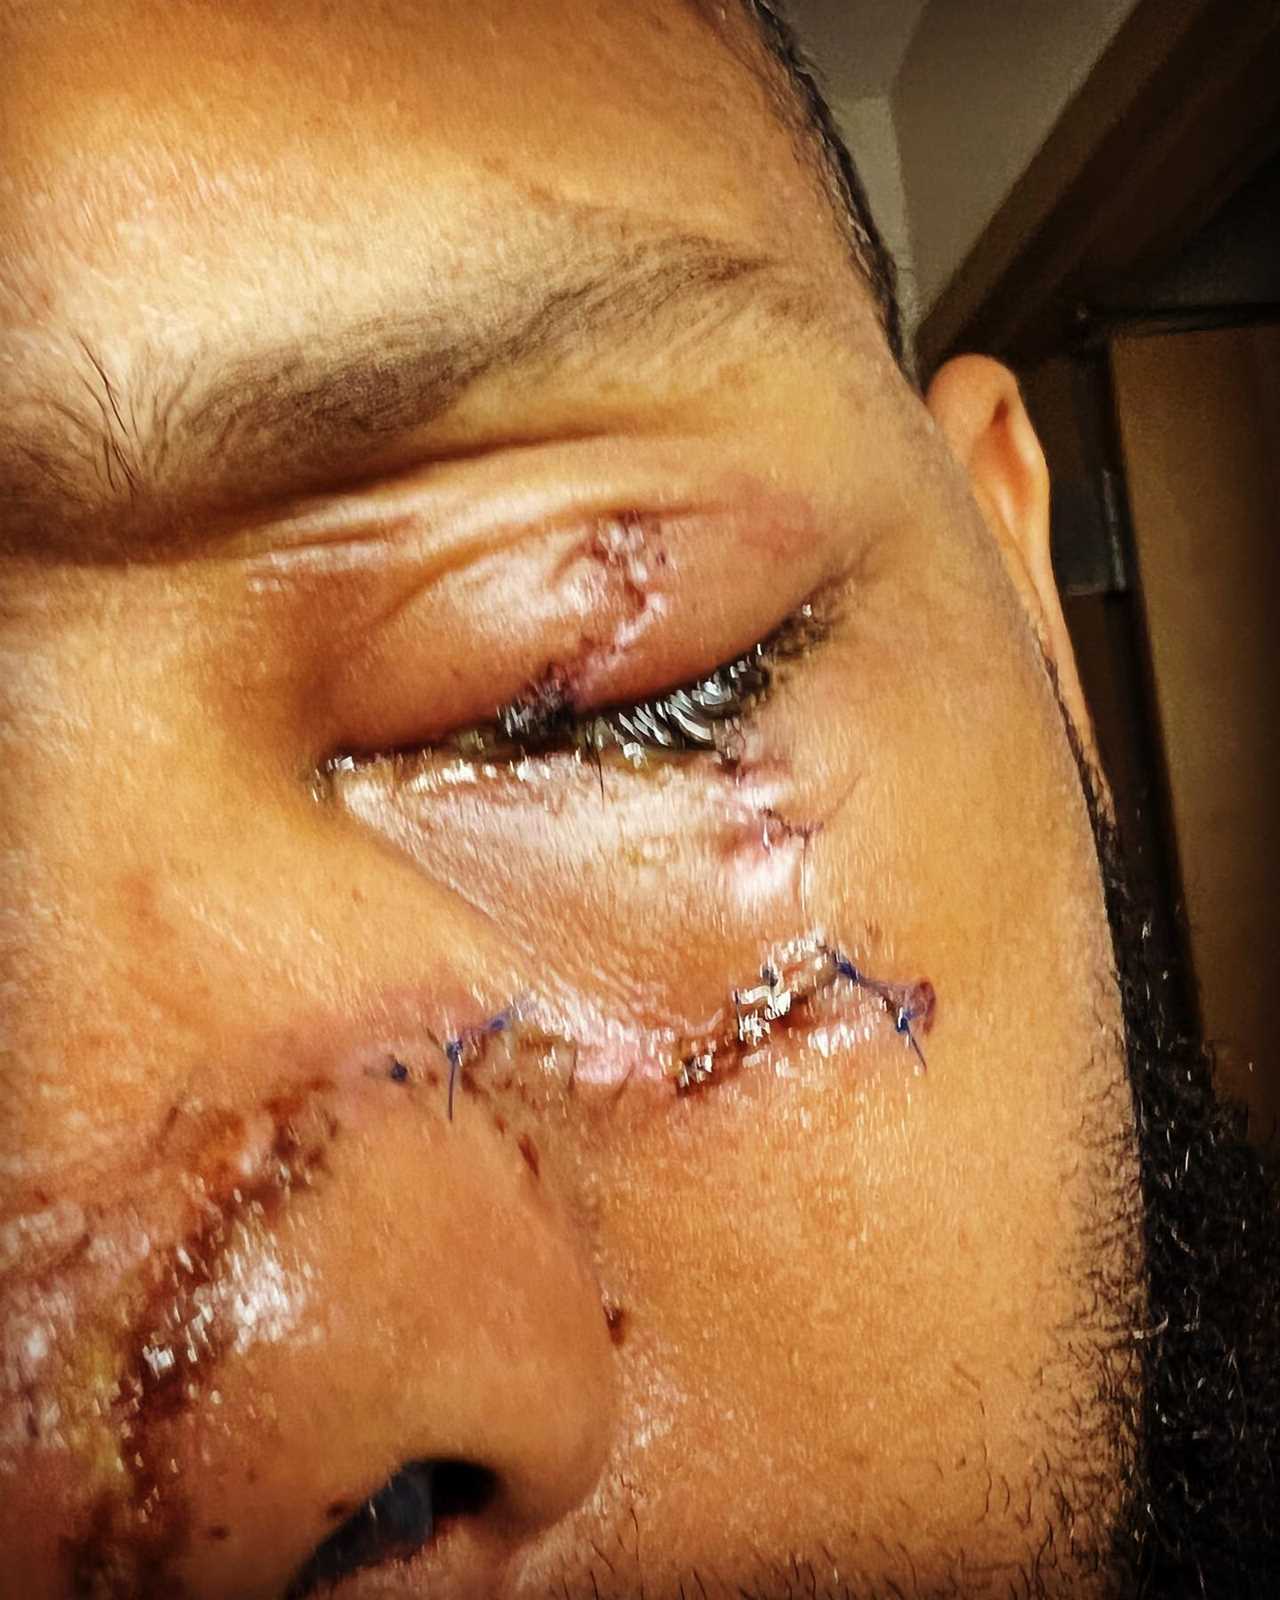 Top Chef’s Justin Sutherland shares terrifying photo of severe facial injury after he fell off a boat INTO a propeller